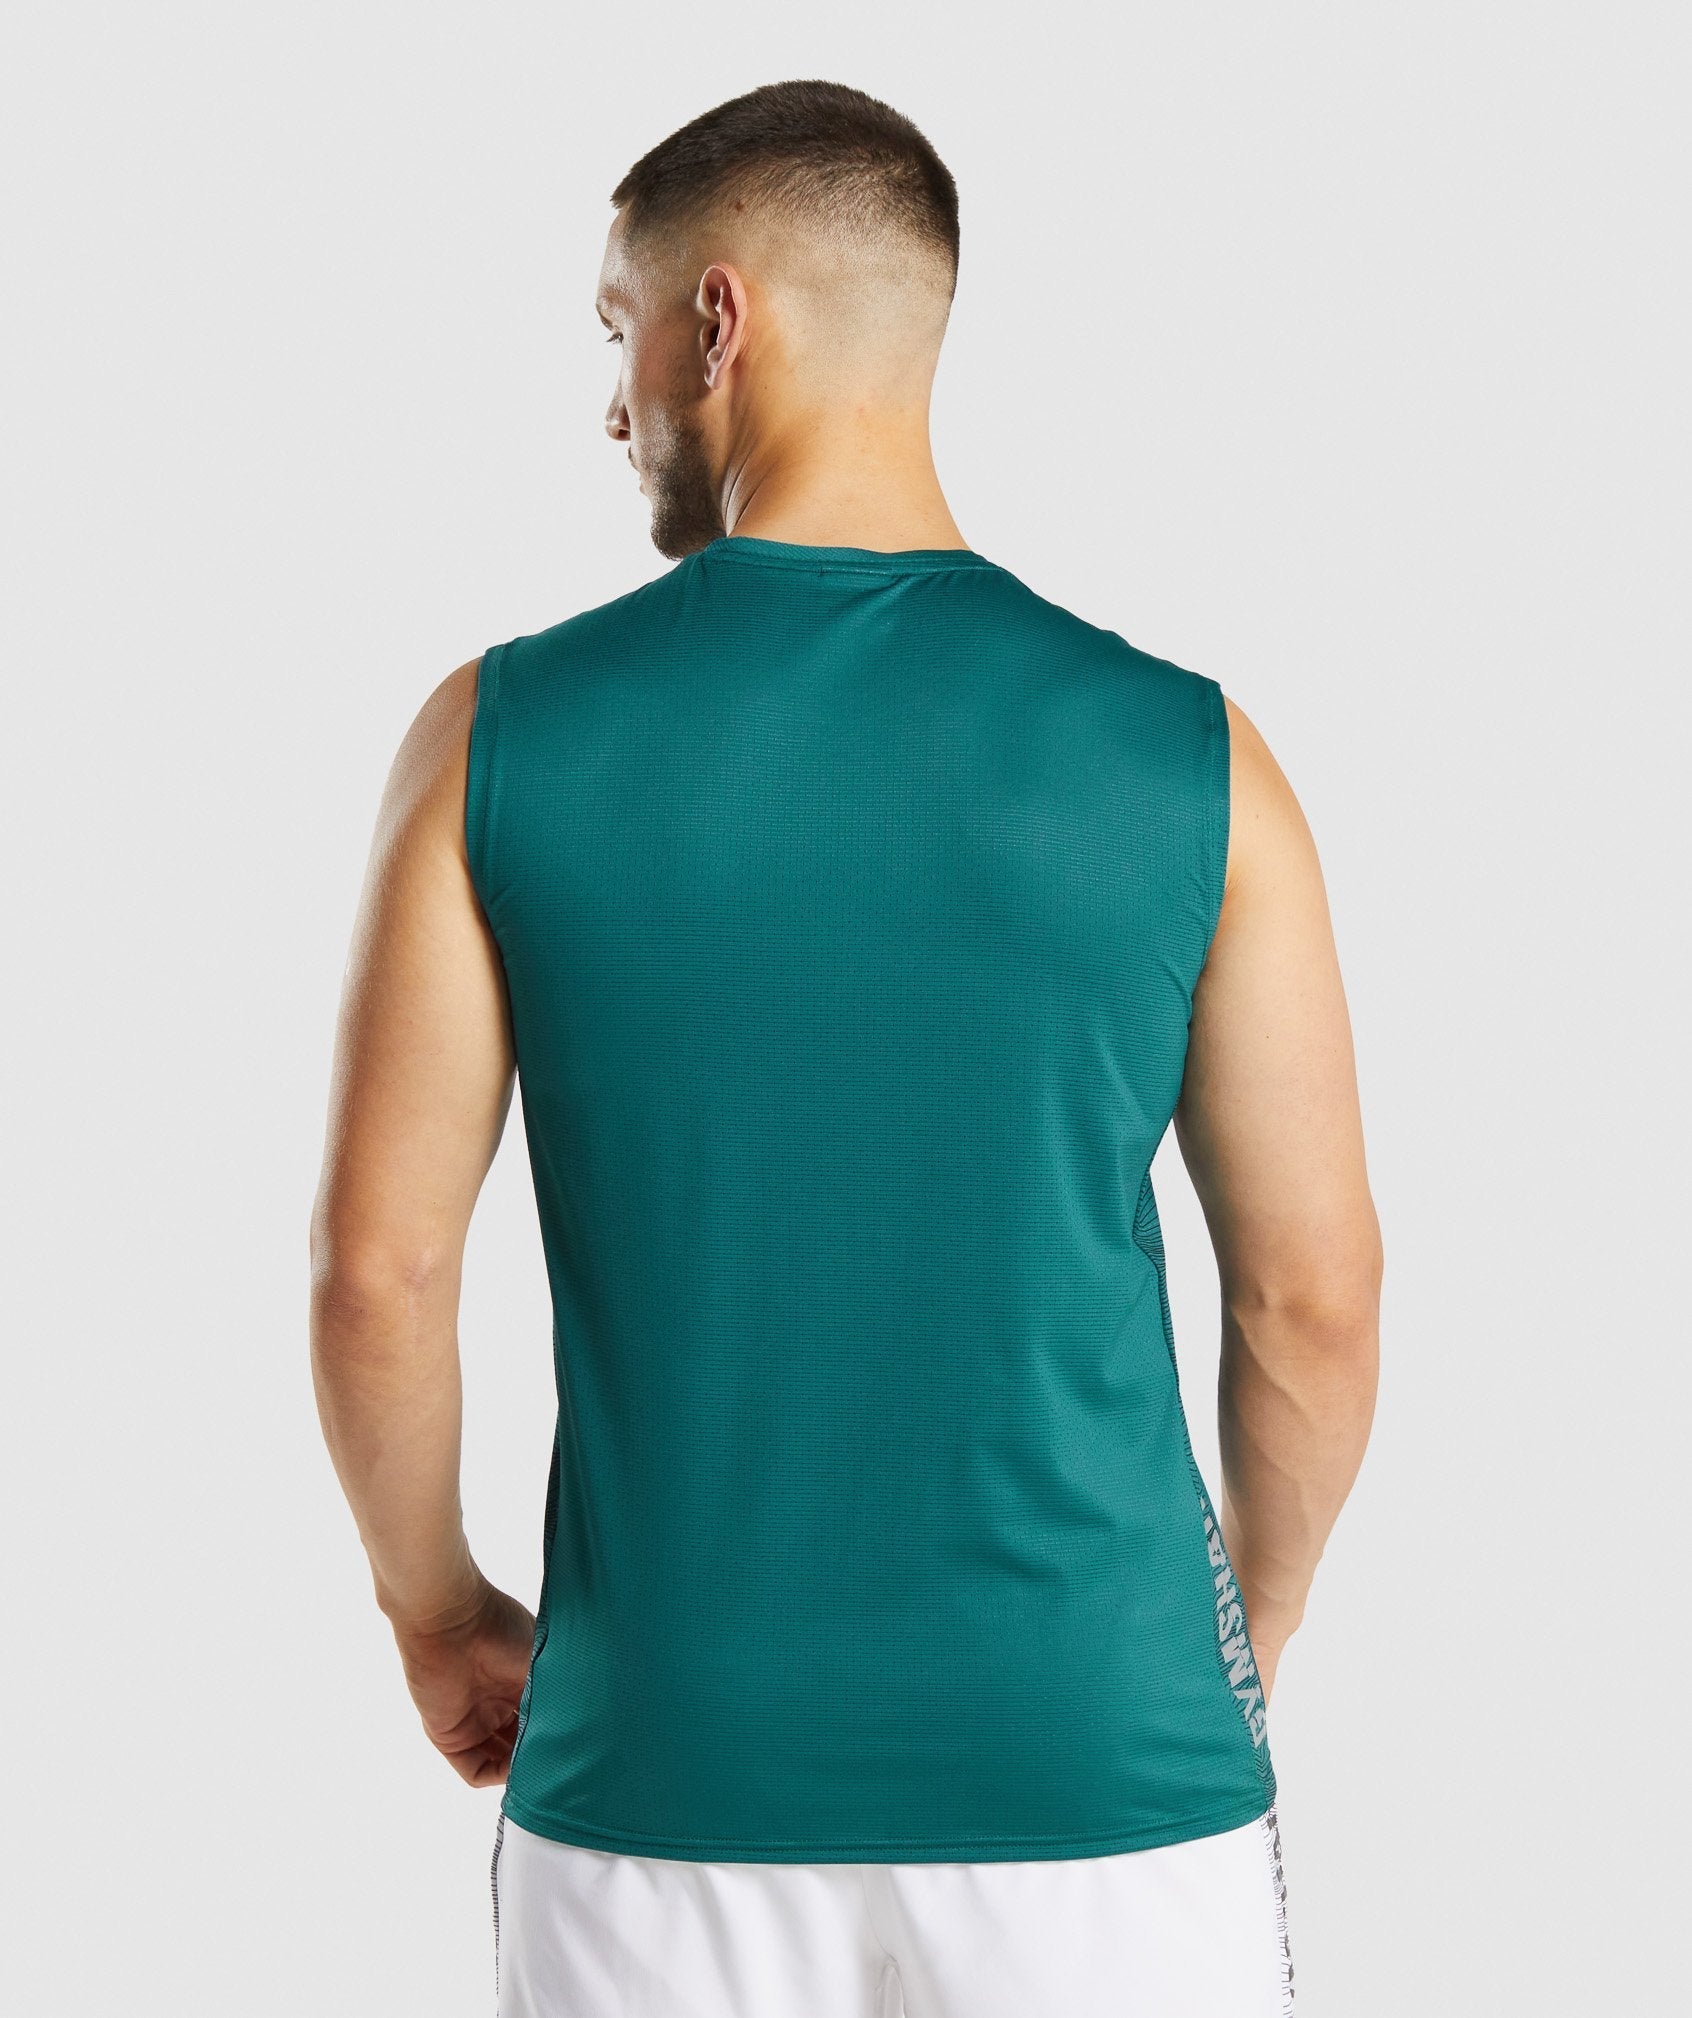 Sport Tank in Teal - view 2